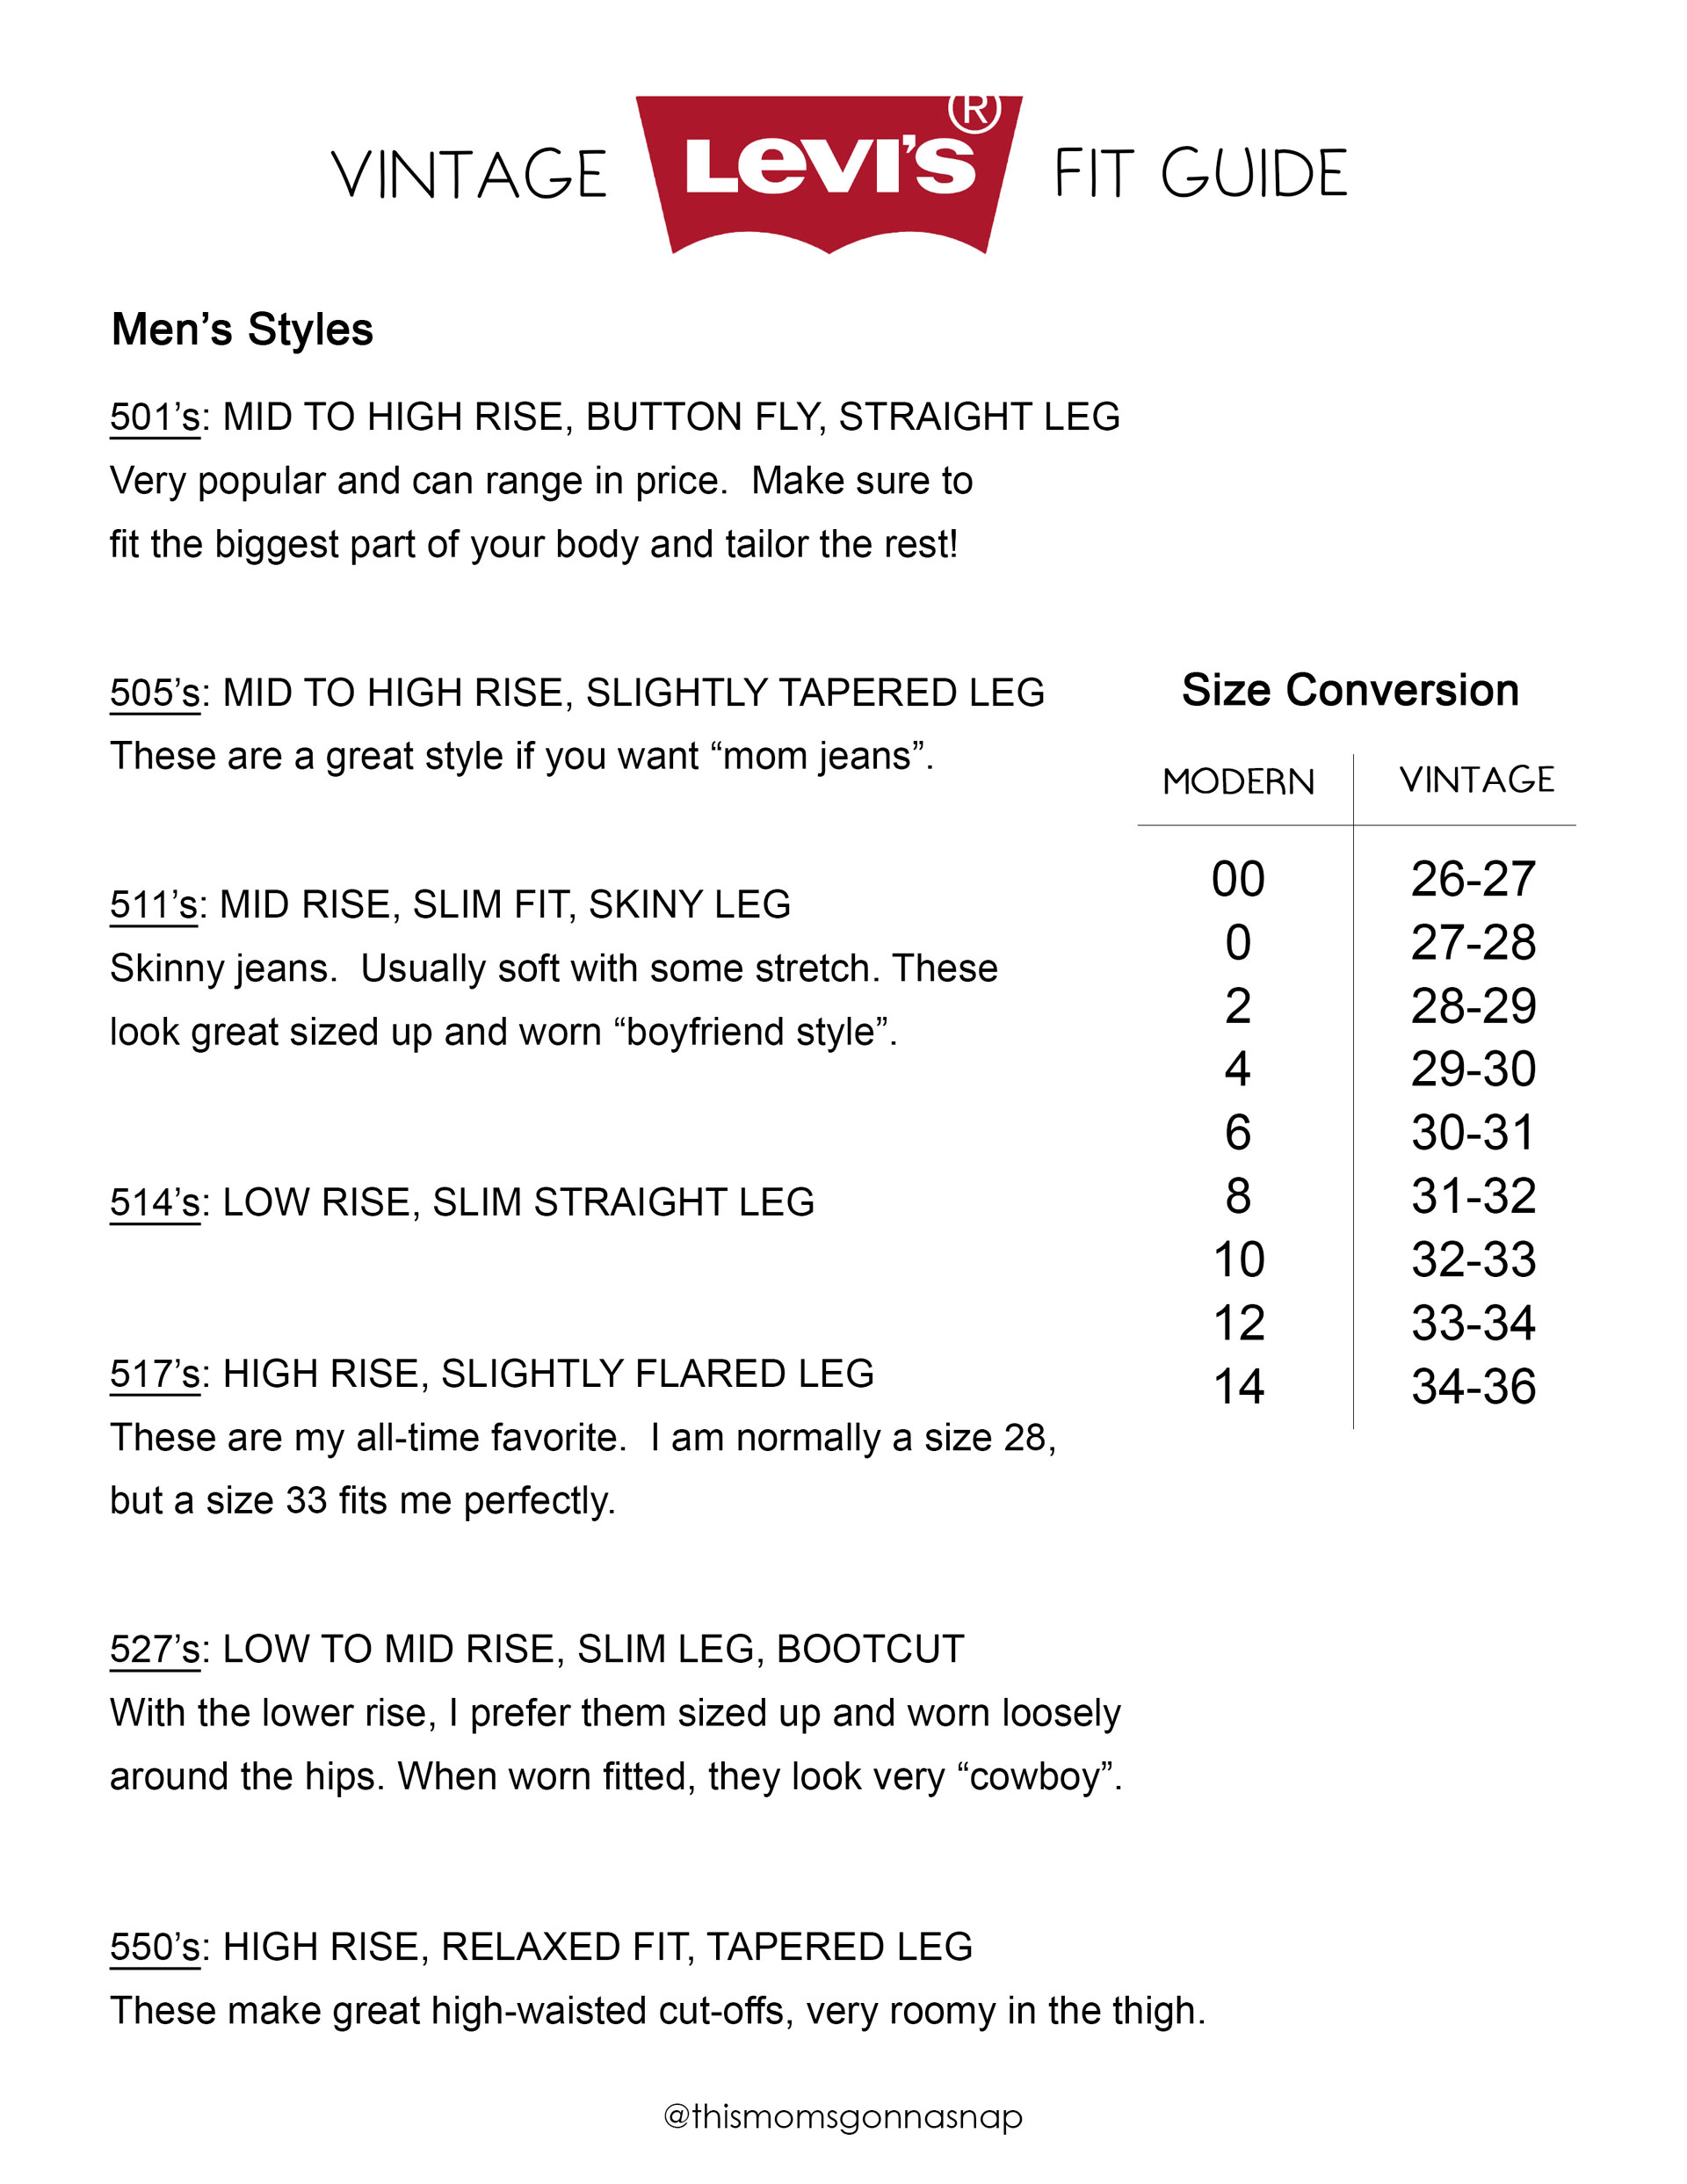 Levi's Wedgie Size Guide Czech Republic, SAVE 44% 